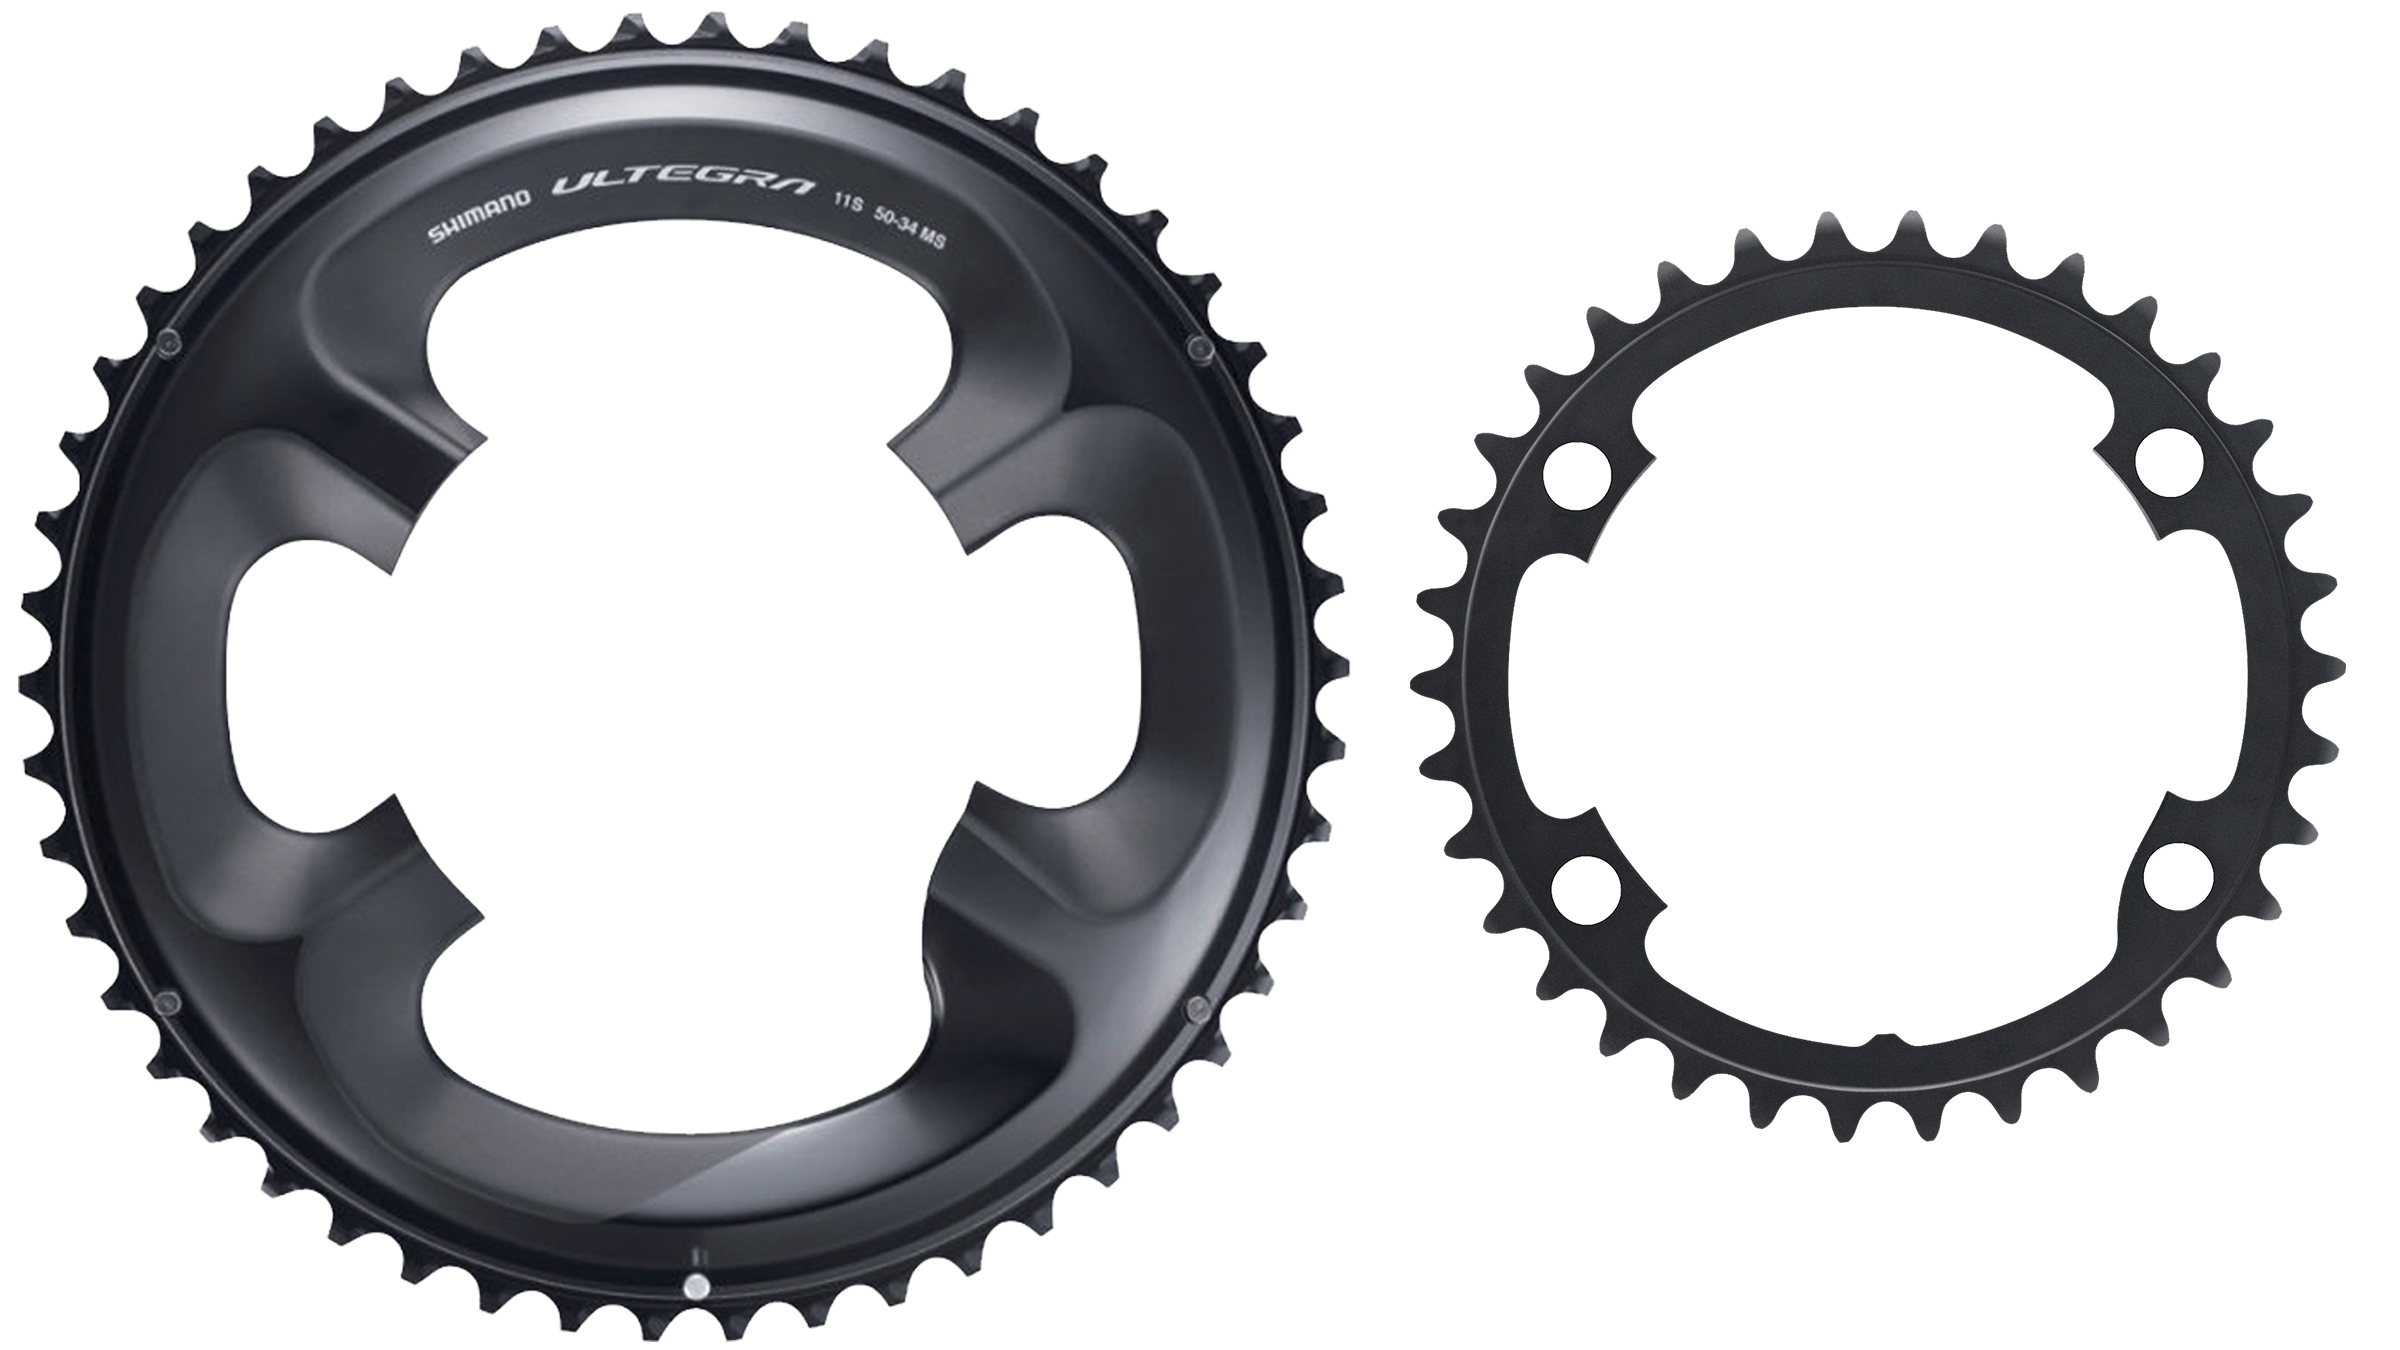 ultegra front chainring